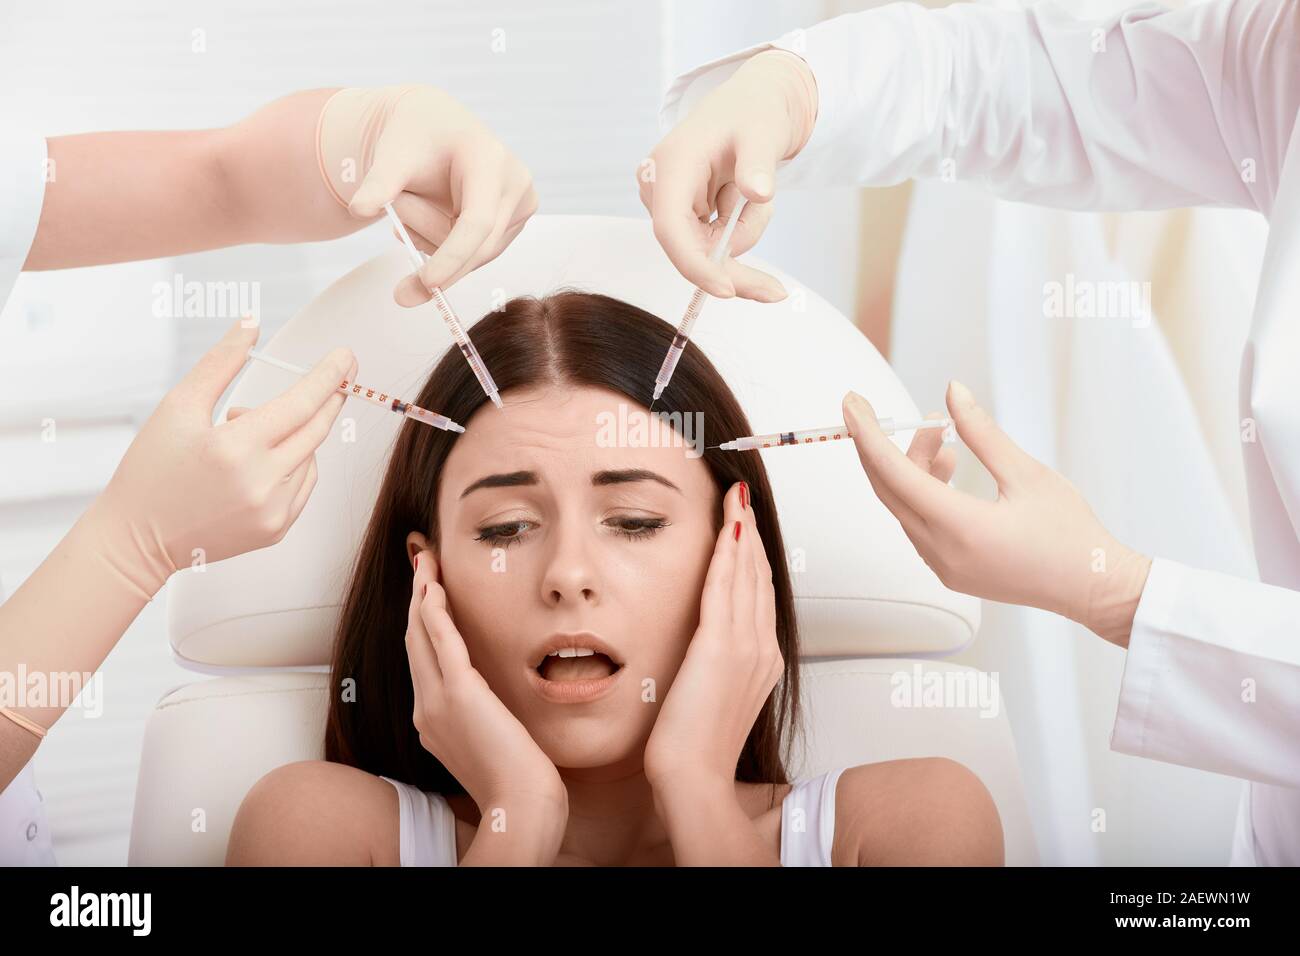 Aestethic medicine - idea of fear about aesthetic medicine treatments Stock Photo